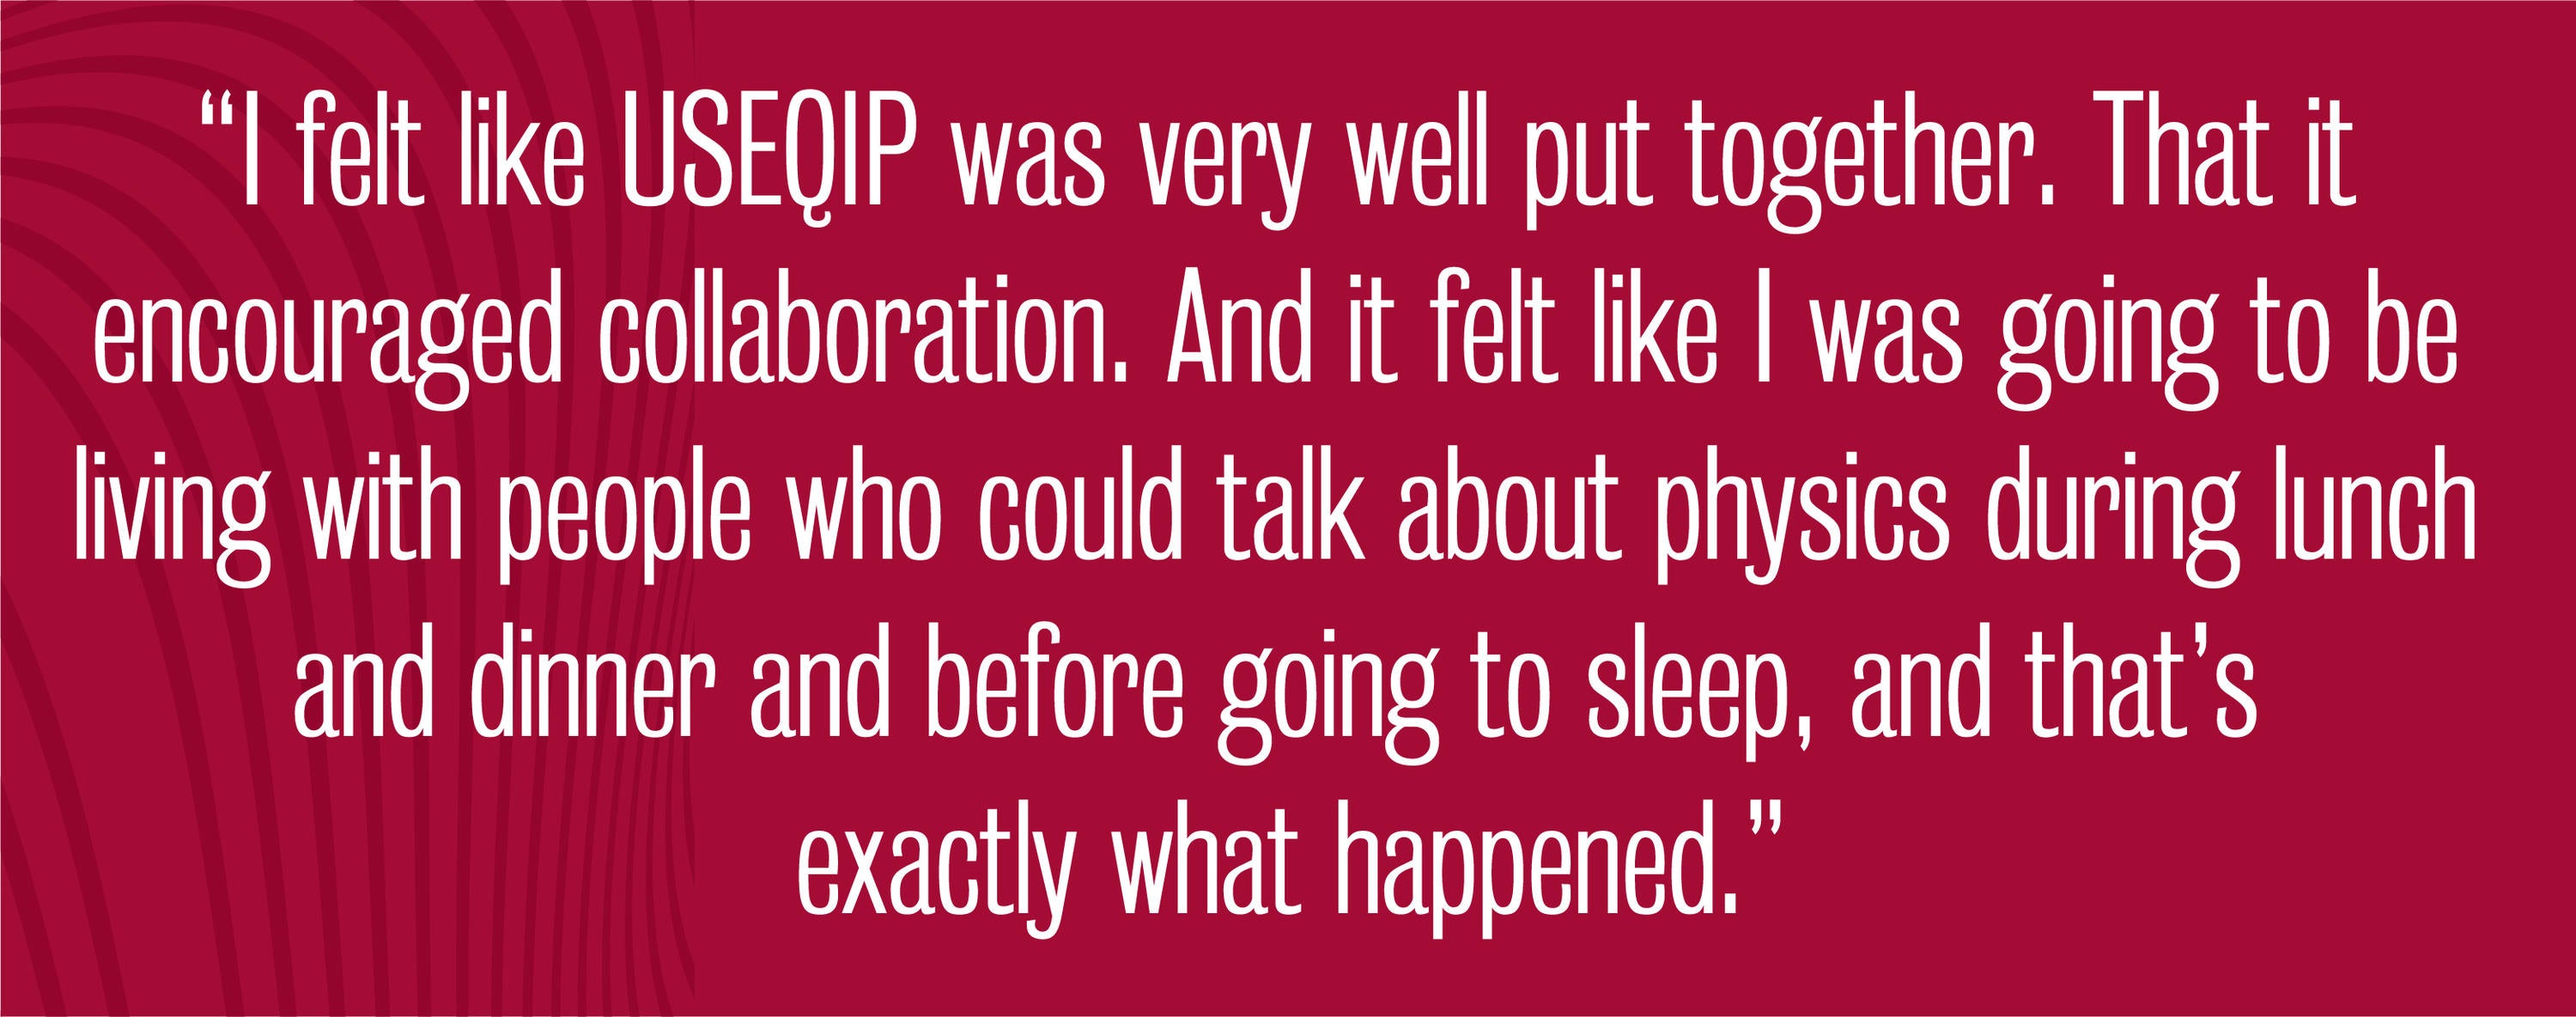 quote - I felt like USEQIP was very well put together. That it encouraged collaboration. And it felt like I was going to be living with people who could talk about physics during lunch and dinner and before going to sleep, and that’s exactly what happened